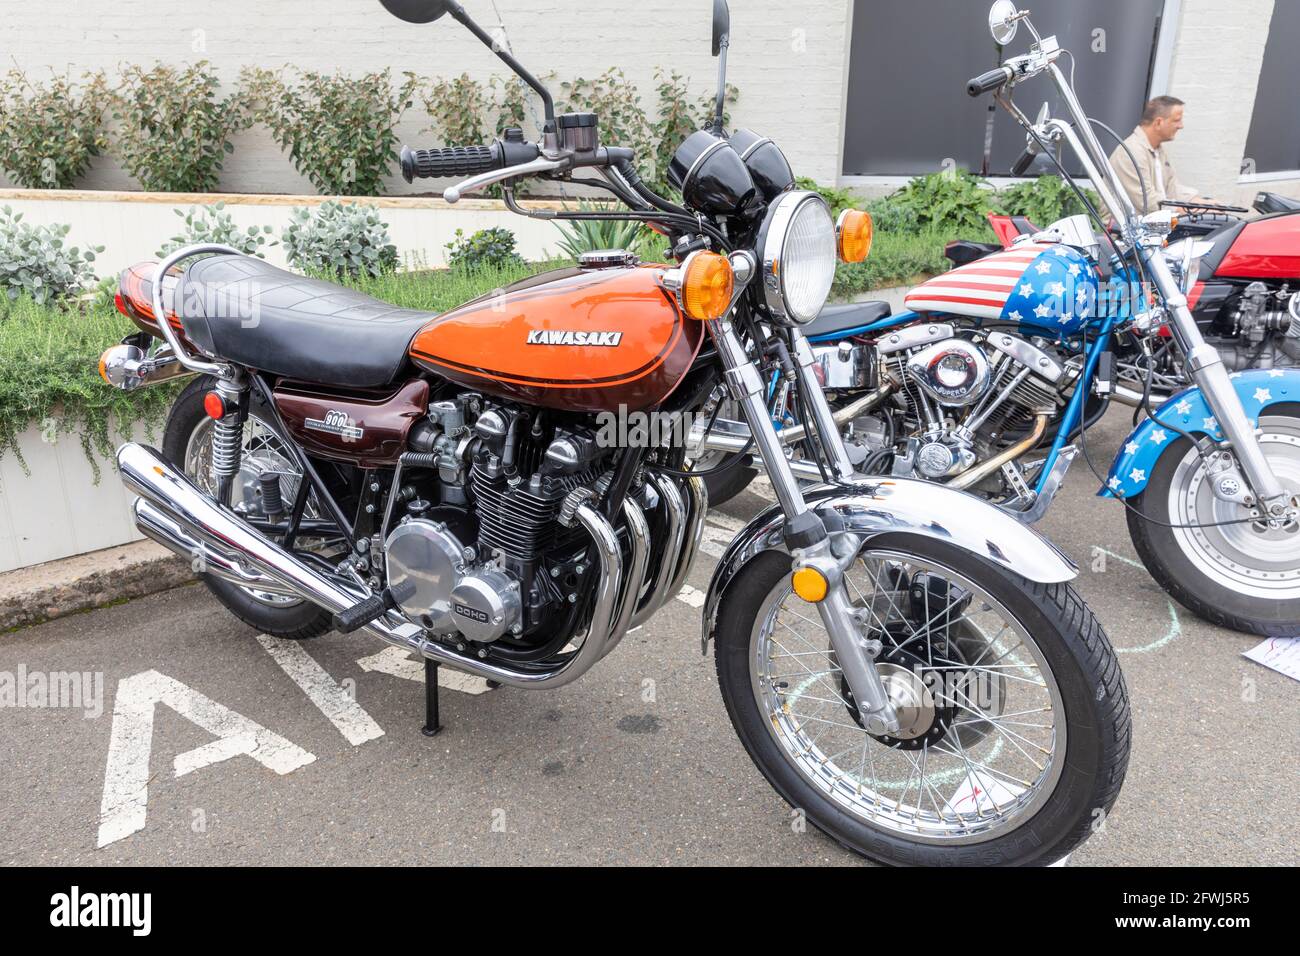 1973 model z900 motorbike on display at a classic vehicle show in Pittwater,Sydney,Australia Stock Photo - Alamy